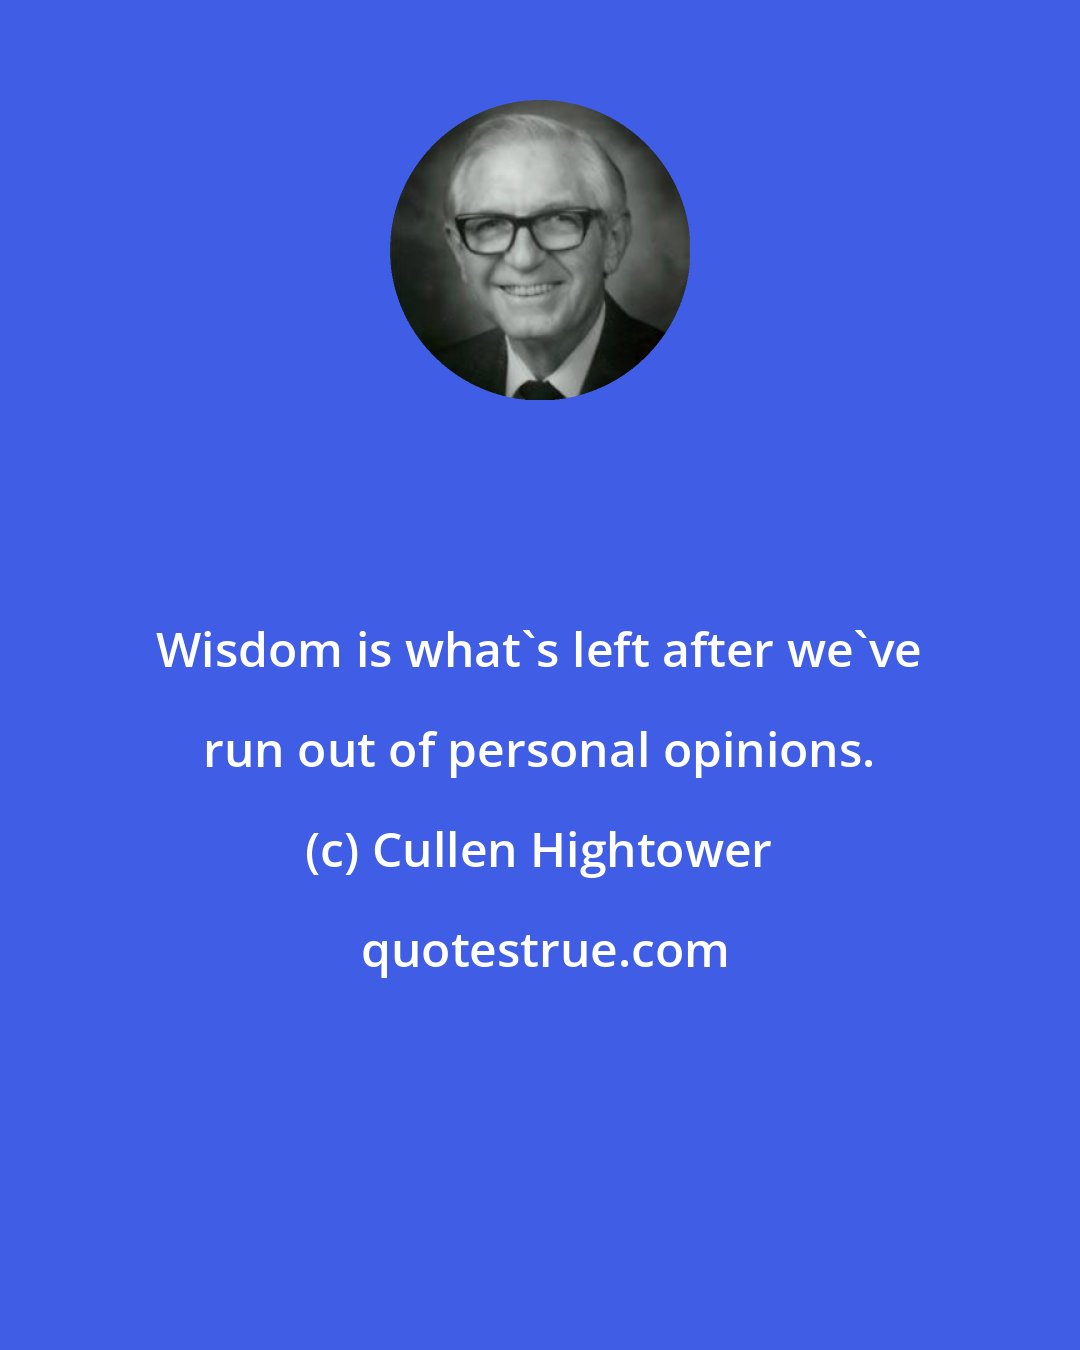 Cullen Hightower: Wisdom is what's left after we've run out of personal opinions.